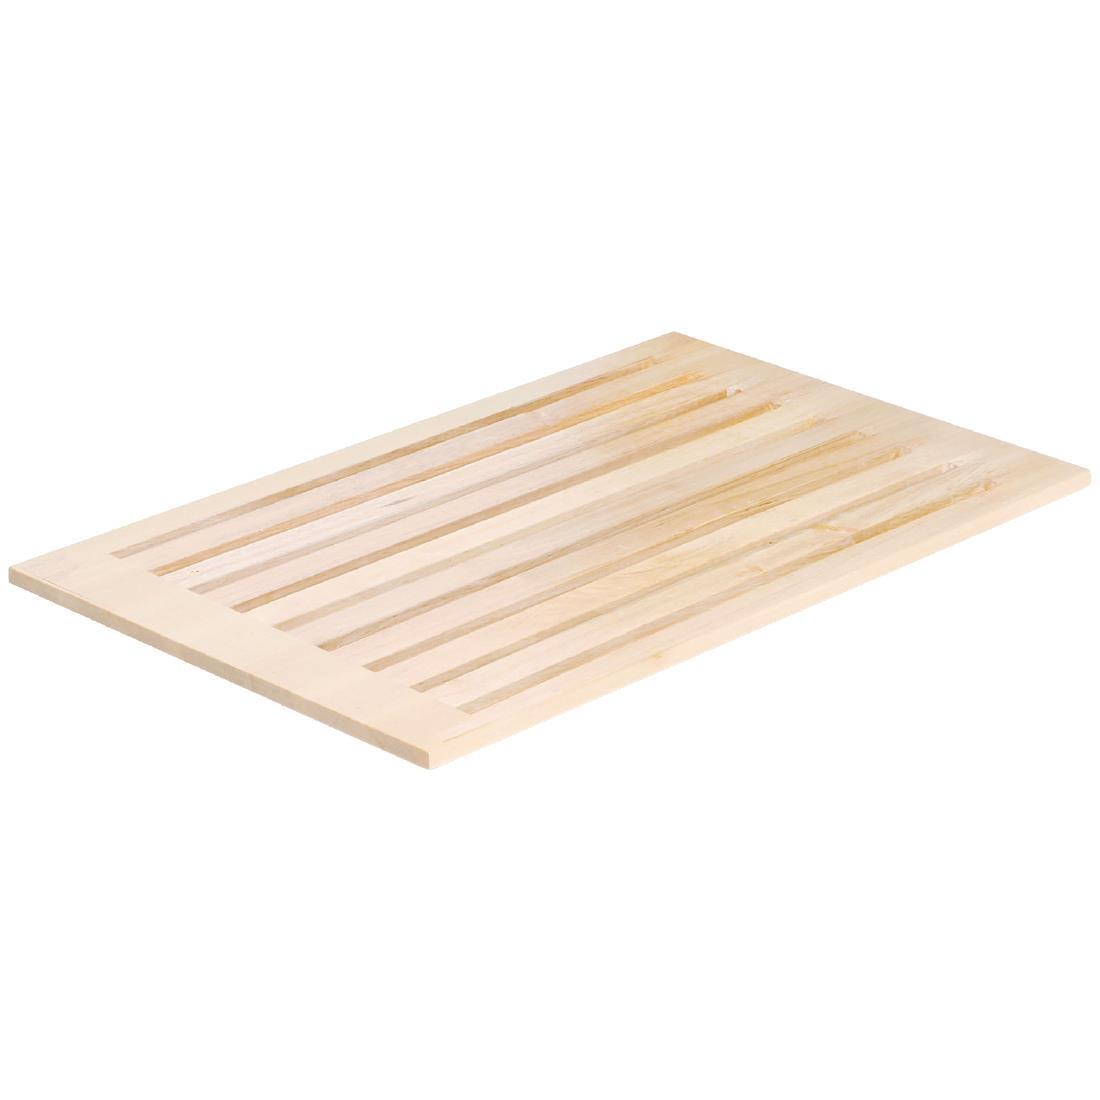 APS Frames Maple Wood 1/1 GN Slotted Cutting Board - Each - GC908 - 1